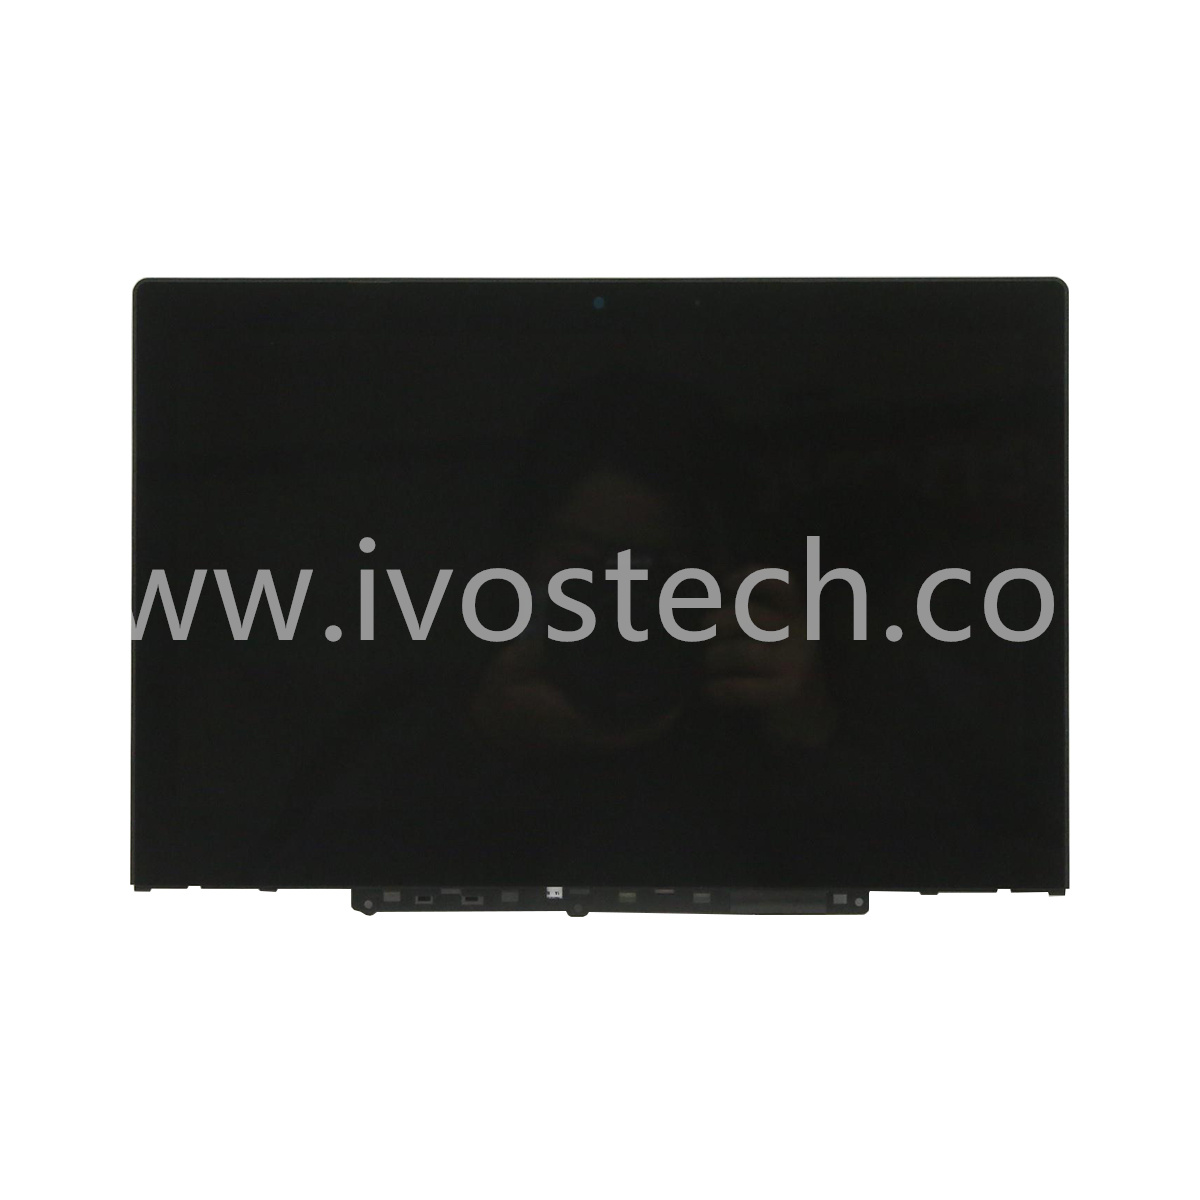 5D10S39681 11.6” HD Laptop LCD Touch Screen Display with Bezel Assembly for Lenovo Winbook 300e 2nd Gen AST 82GK